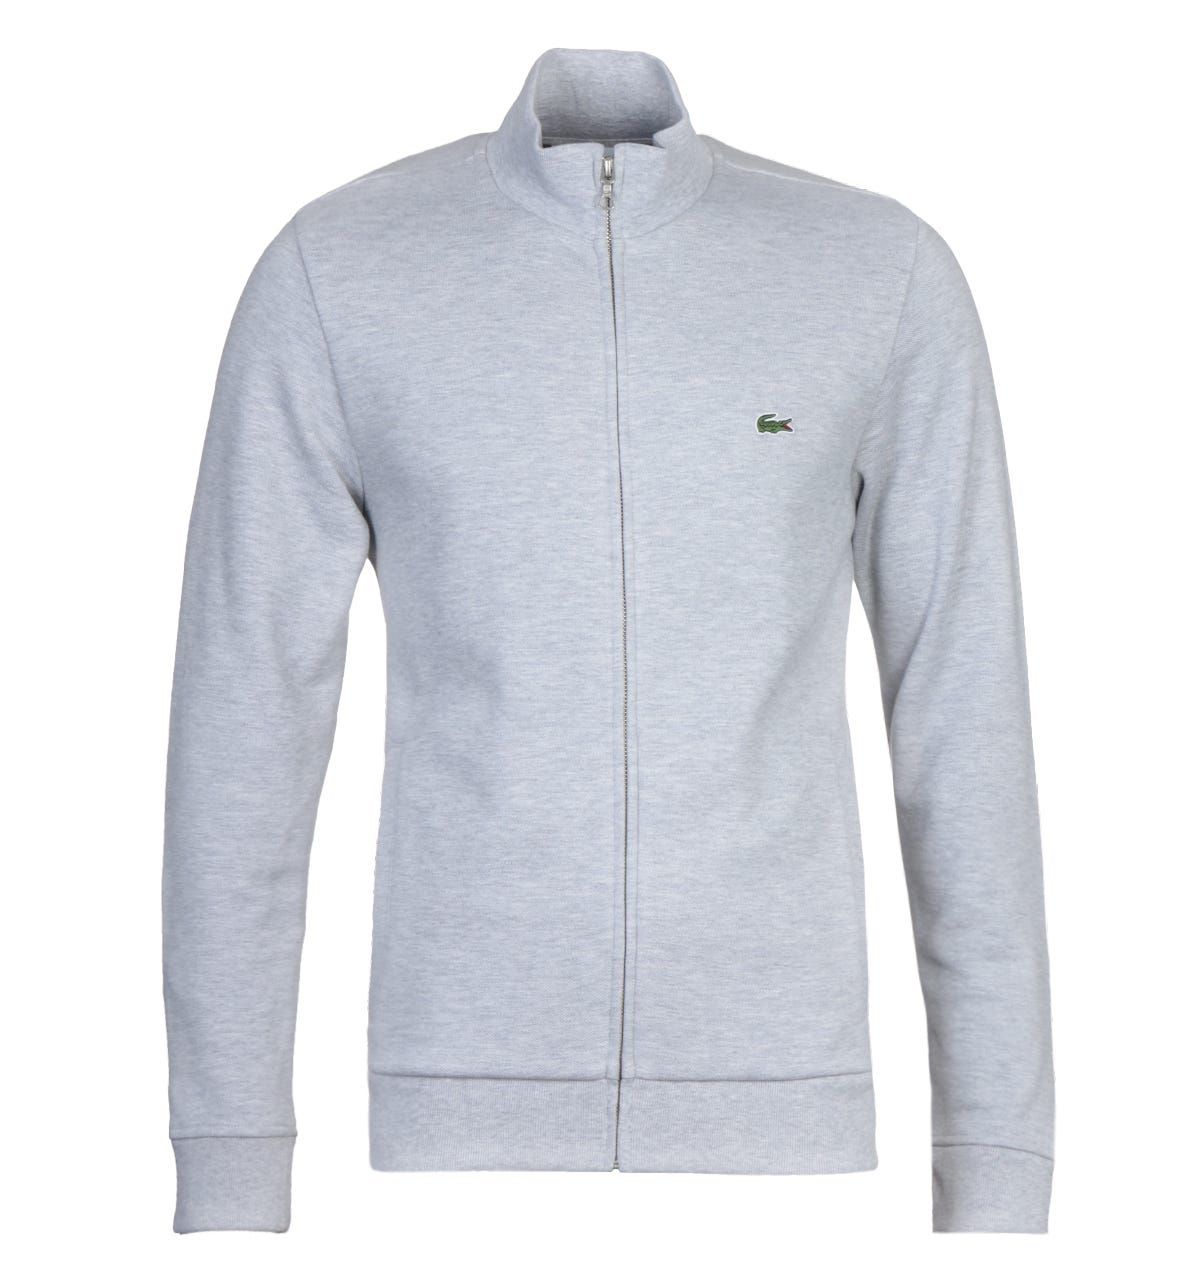 <p>A pique cotton composition crafted by Lacoste. The Lacoste Homme Grey Zip Through Sweatshirt is fitted with a full zip fastening, which also features a funnel neck for a light and comforting fit. The classic silhouette offers versatility, with the design being finished with the Lacoste logo embroidered on the chest.</p><ul><li>Pique cotton composition</li><li>Funnel neck</li><li>Zip fastening</li><li>Ribbed trims</li><li>Tonal stitching</li><li>Lacoste logo embroidered on chest</li></ul><p>Style & Fit:</p><ul><li>Regular fit</li><li>Fits true to size</li></ul><p>Fabric Composition & Care:</p><ul><li>100% Cotton</li><li>Machine wash</li></ul>